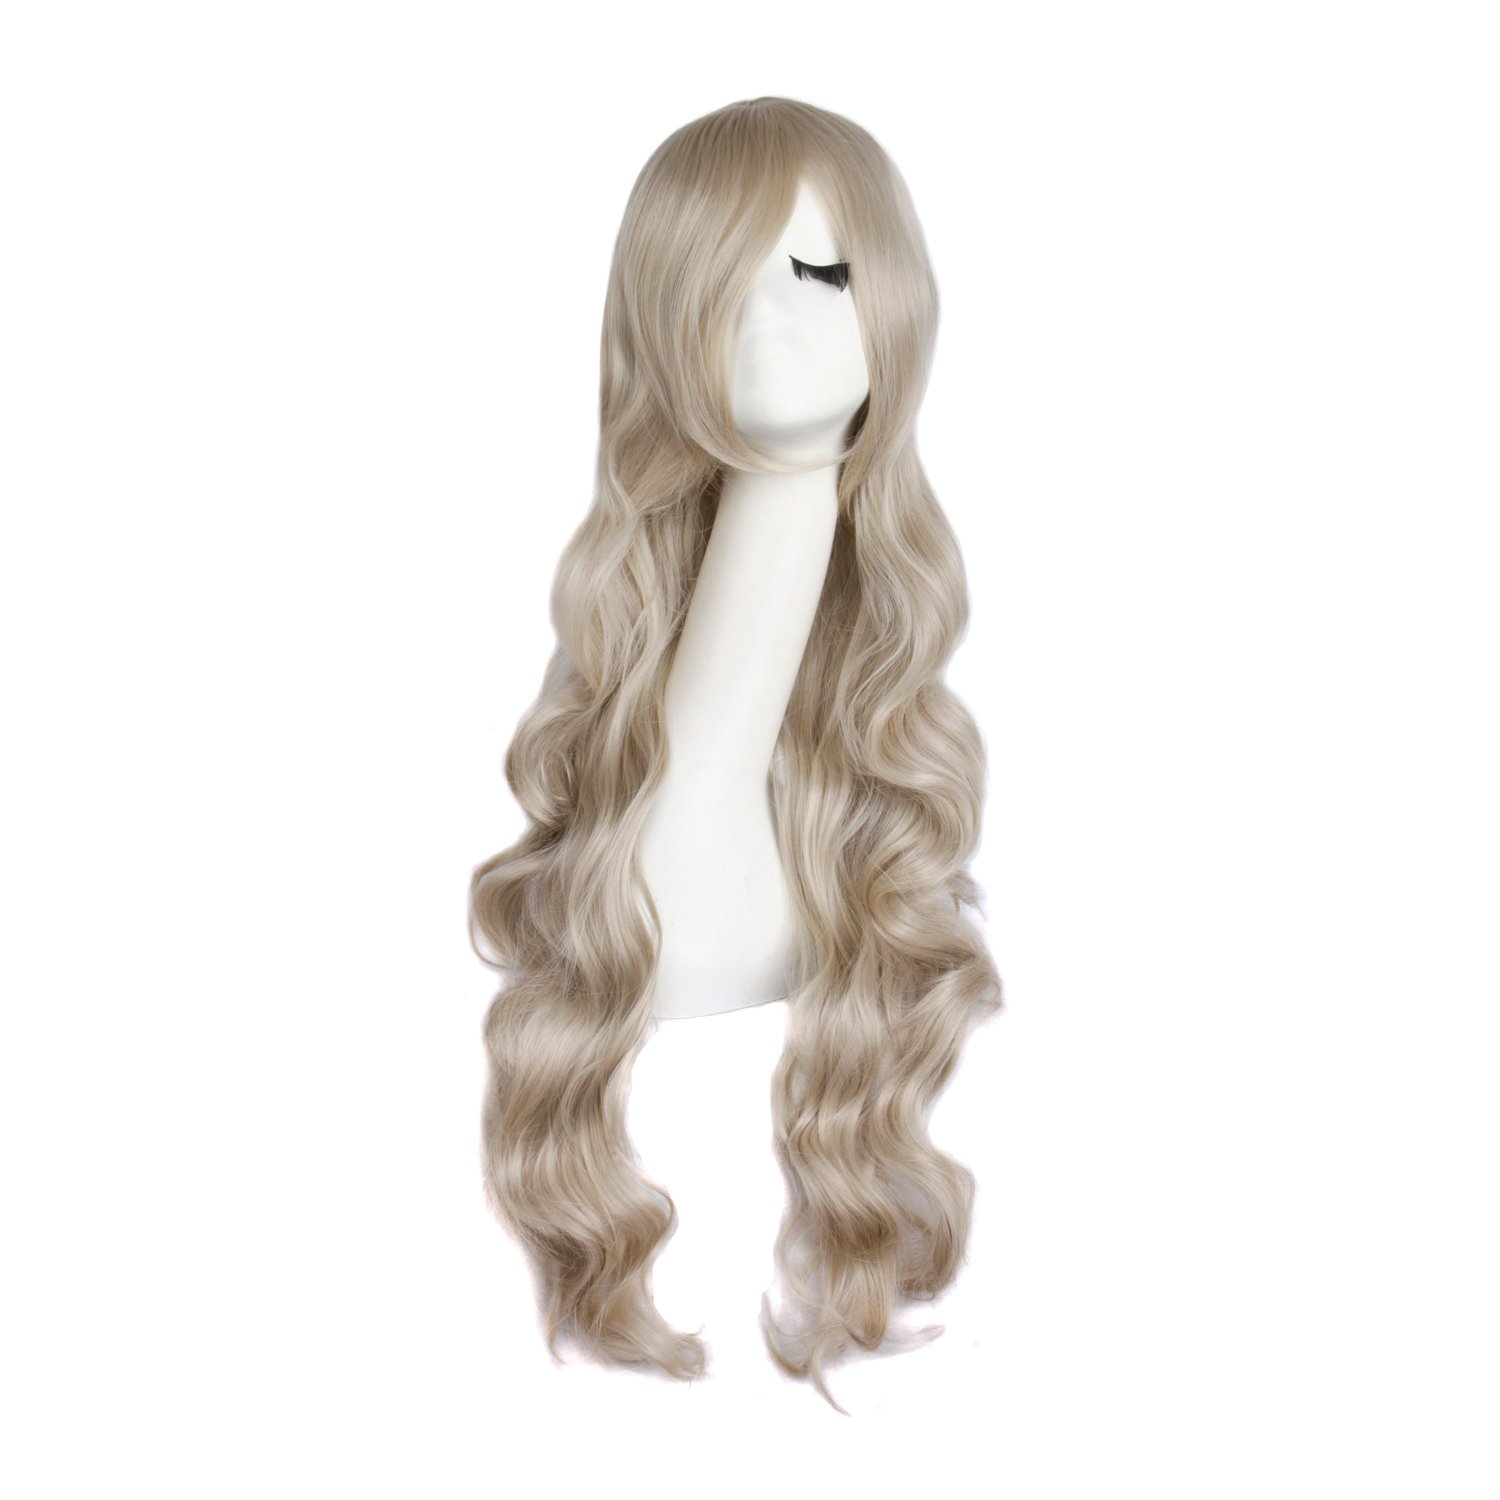 Price:$9.99    MapofBeauty 32" 80cm Long Hair Spiral Curly Cosplay Costume Wig (Ash Brown)  Beauty